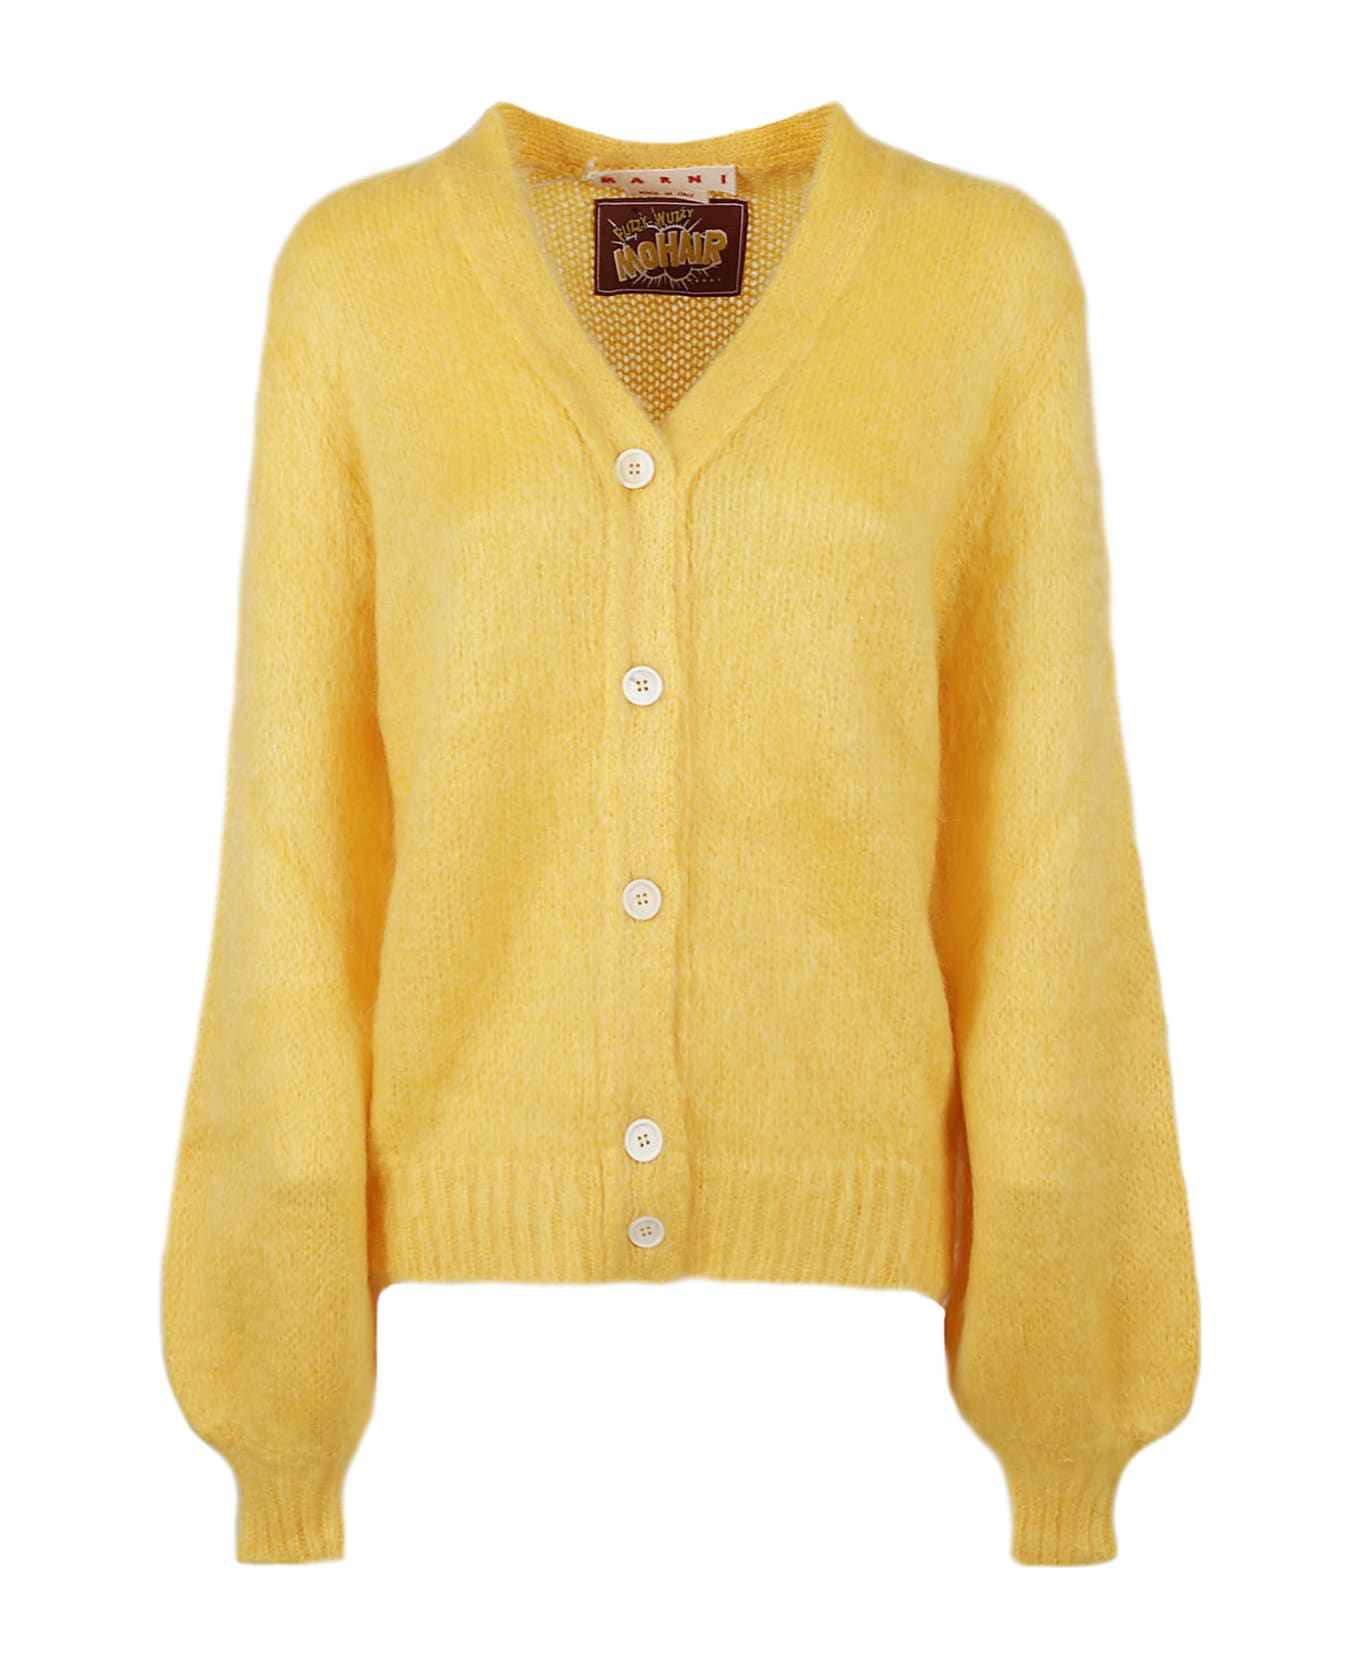 Marni Solid Color Brushed Fuzzy Wuzzy Cardigan - YELLOW カーディガン